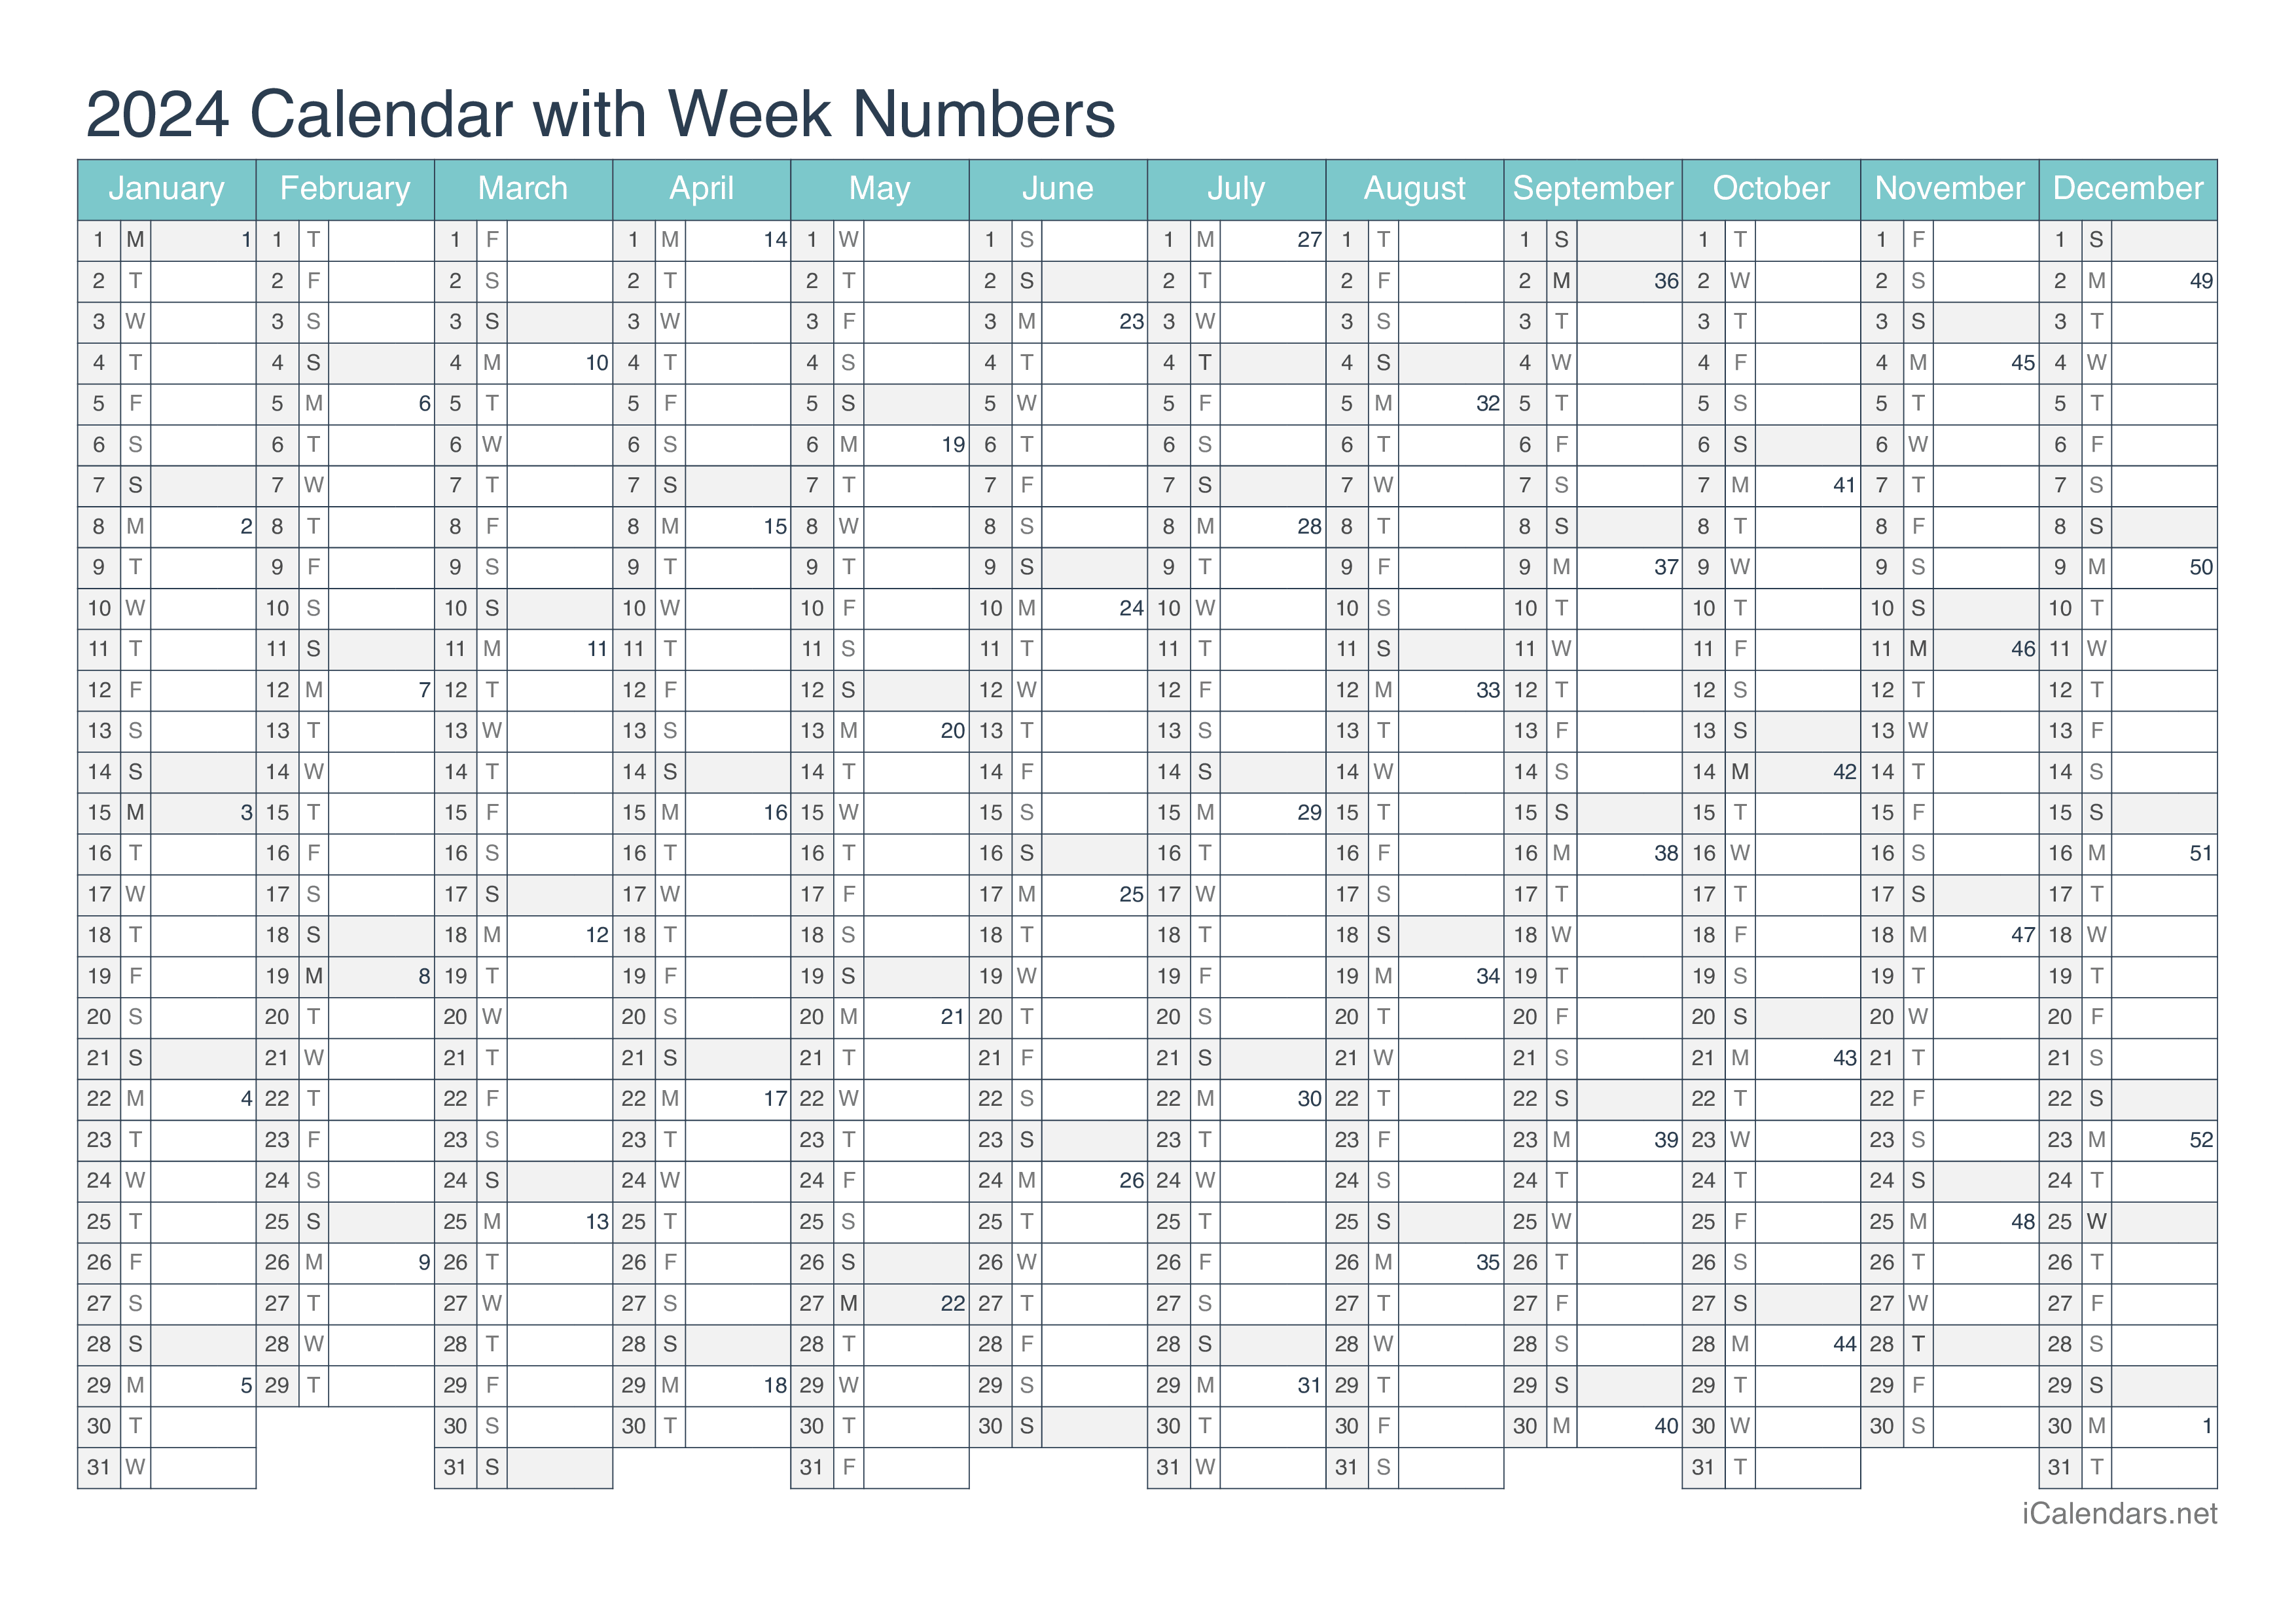 2024 Calendar with week numbers - Turquoise